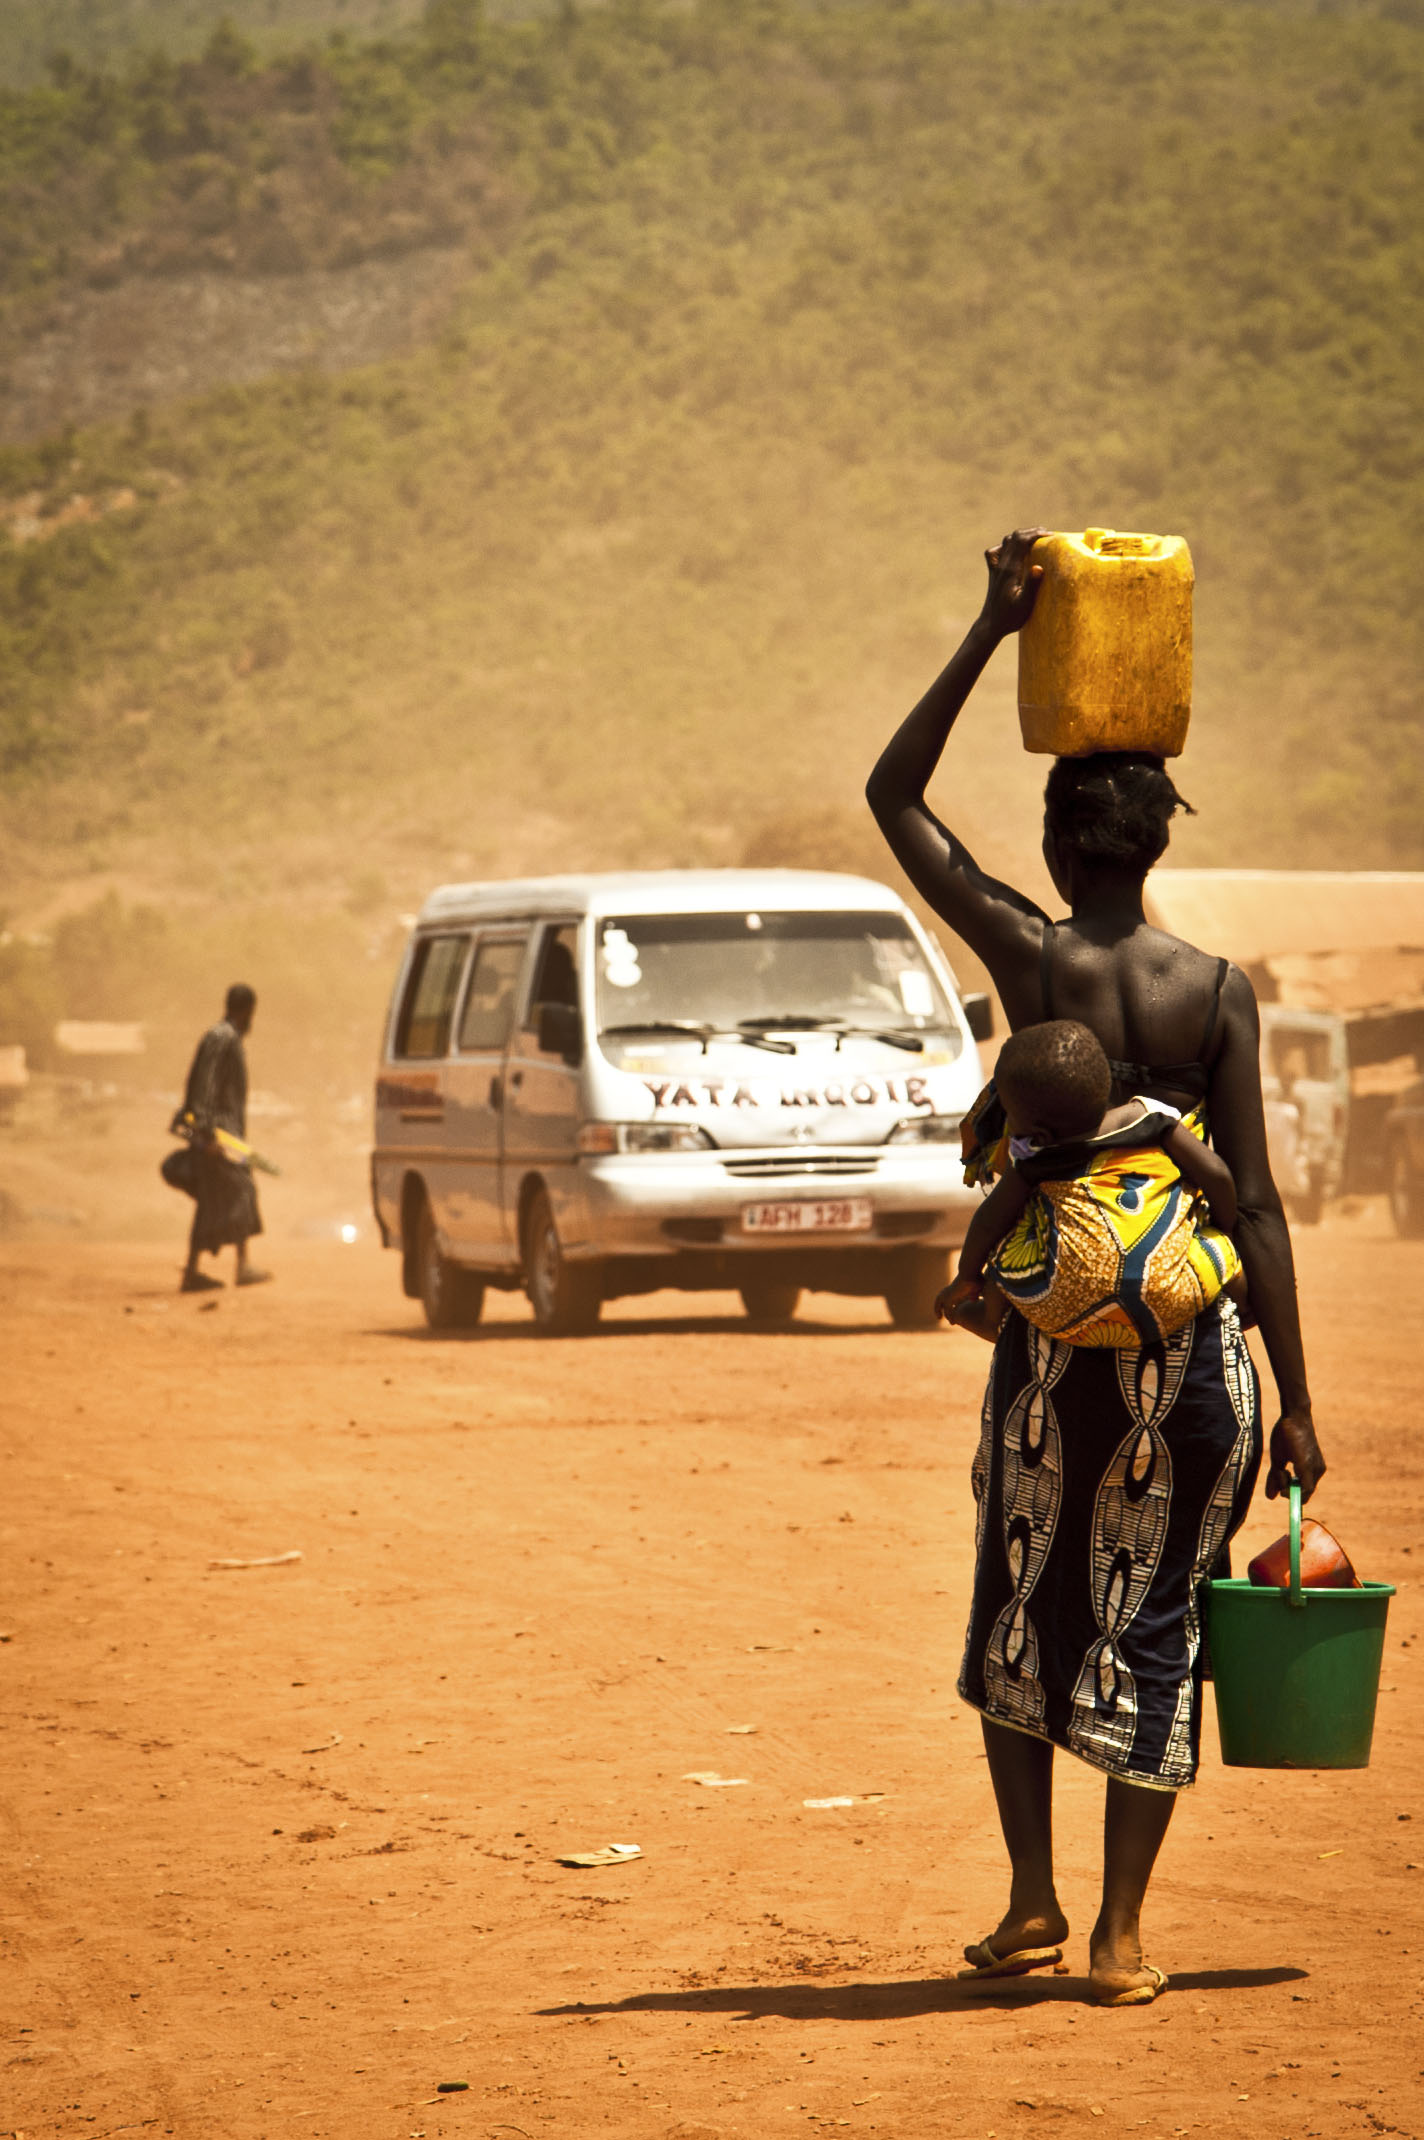 A woman carrying an infant and water containers walks down a dirt road. Photo by Eduardo Arraes